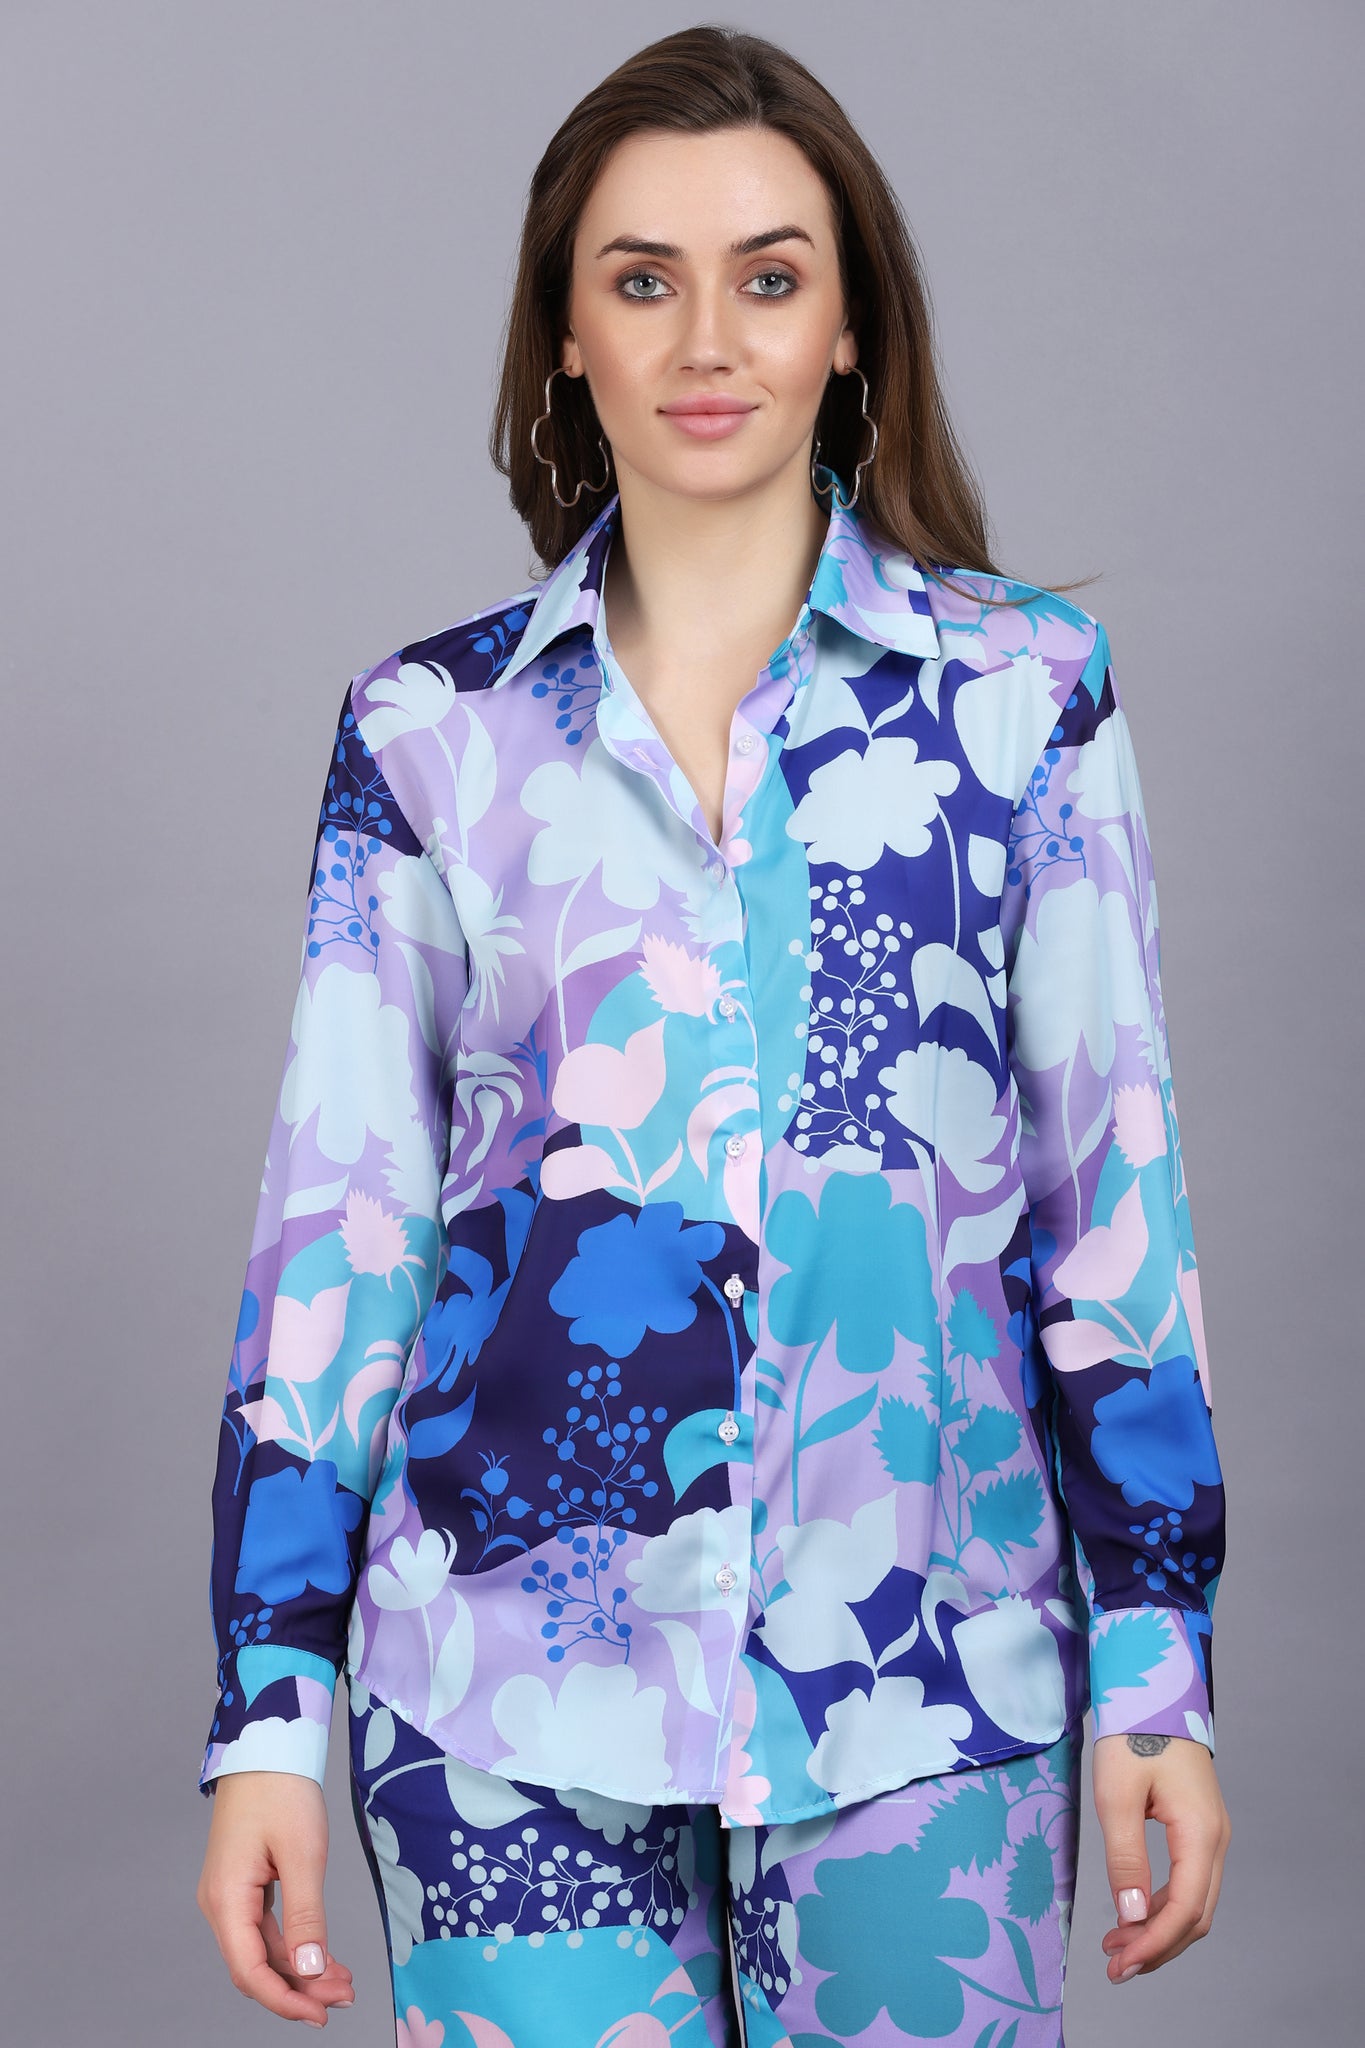 Charming Floral Shirt For Women